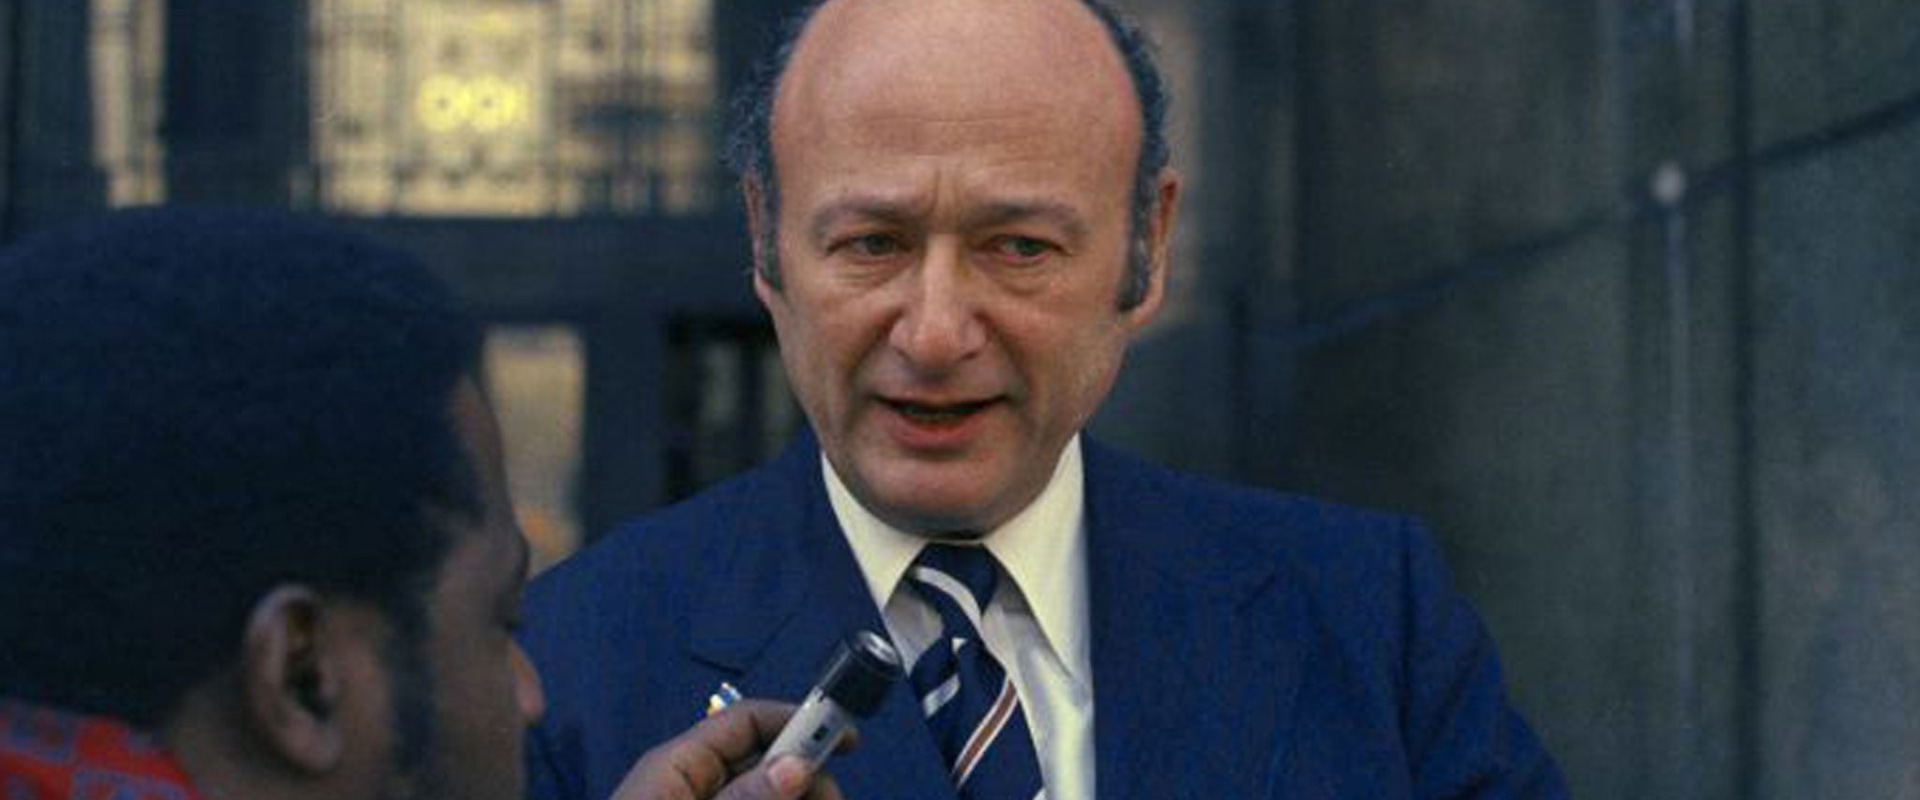 How many terms did ed koch serve as mayor of new york city?